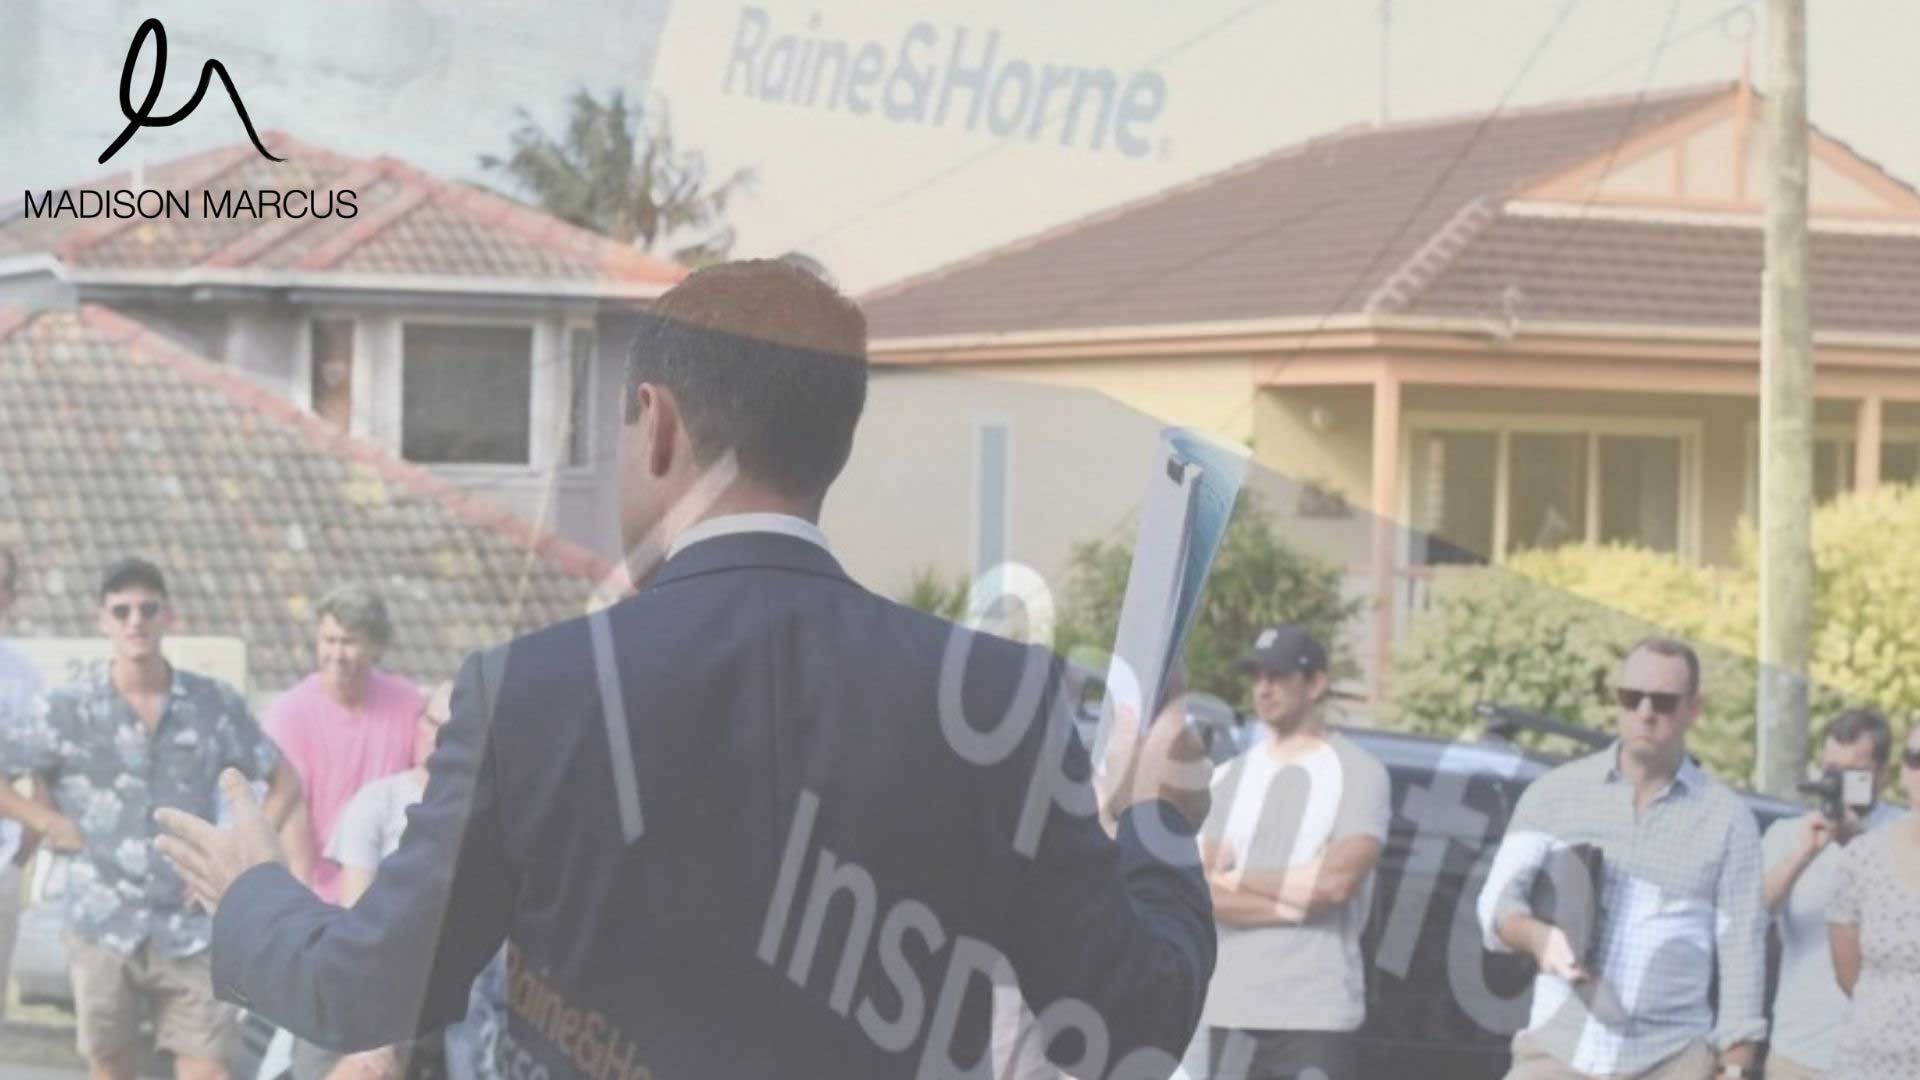 Property Inspections and On-Site Auctions to Reopen